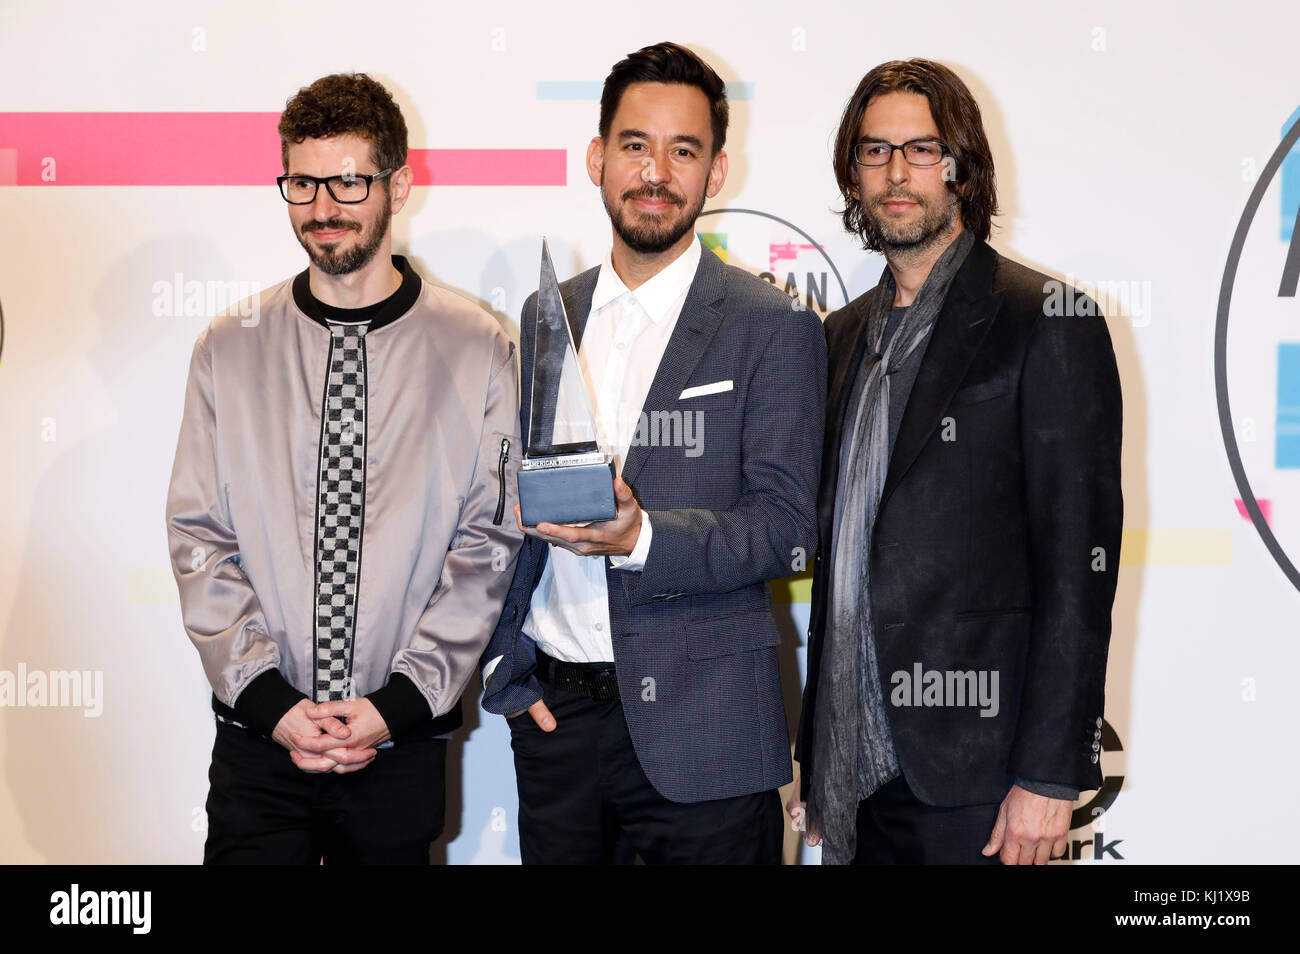 Brad Delson, Mike Shinoda and Rob Bourdon (Linkin Park) attend the 2017 American Music Awards at Microsoft Theater on November 19, 2017 in Los Angeles, California. Stock Photo